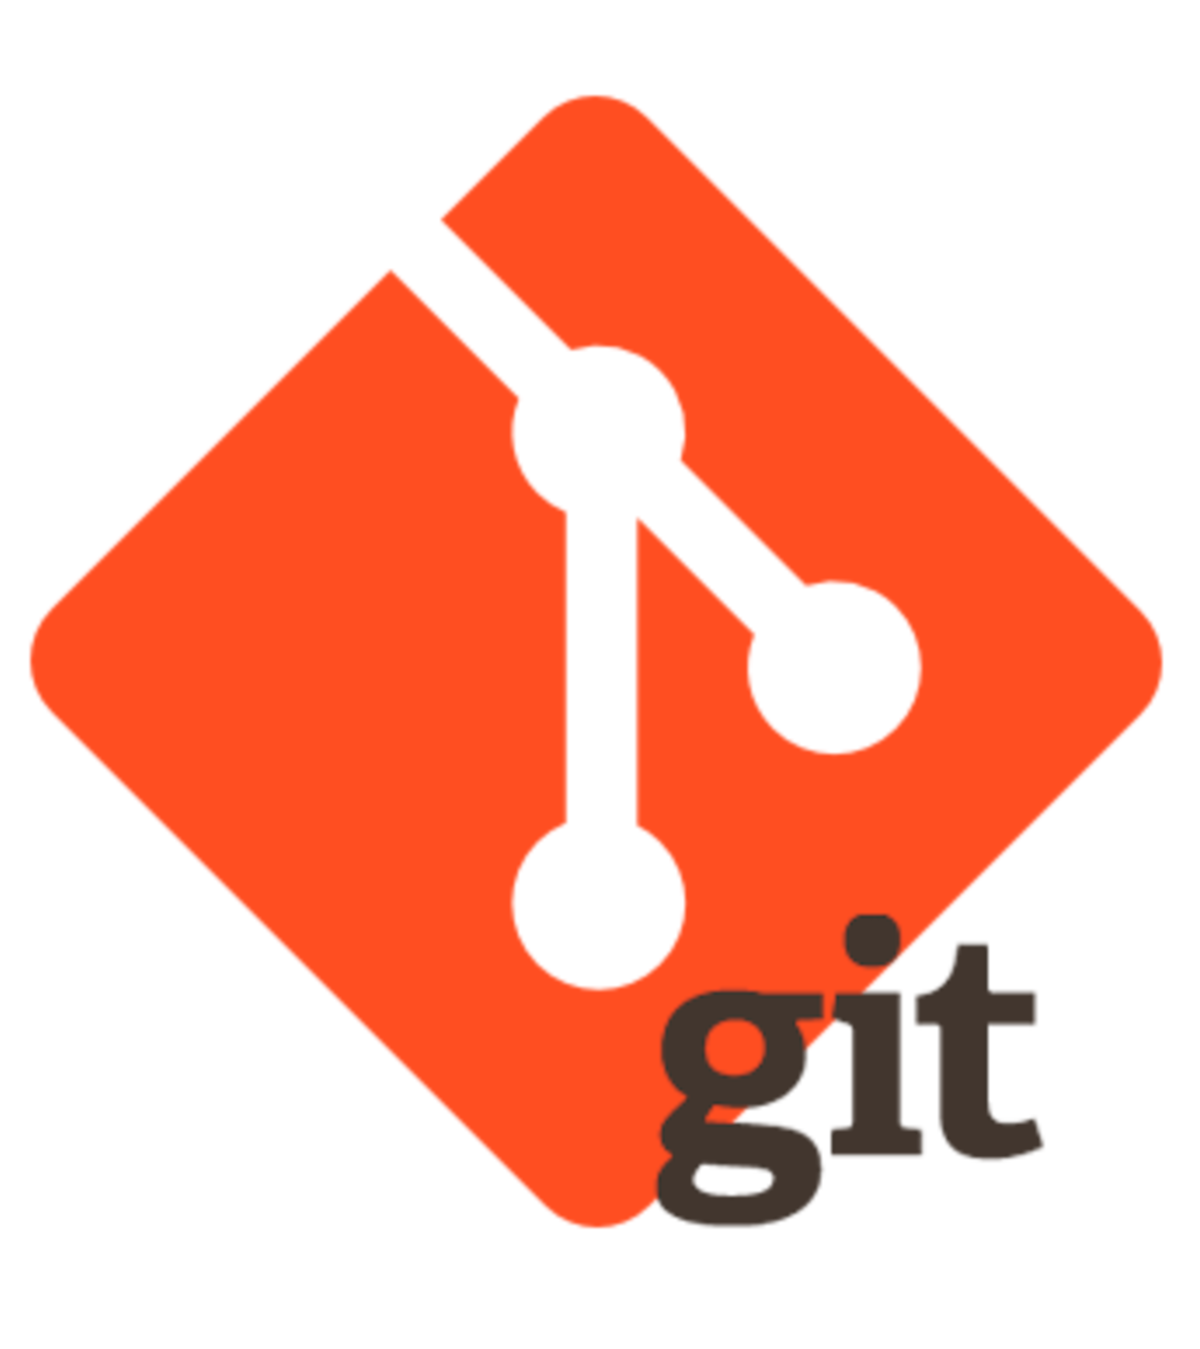 code examples and answer to questions in GIT